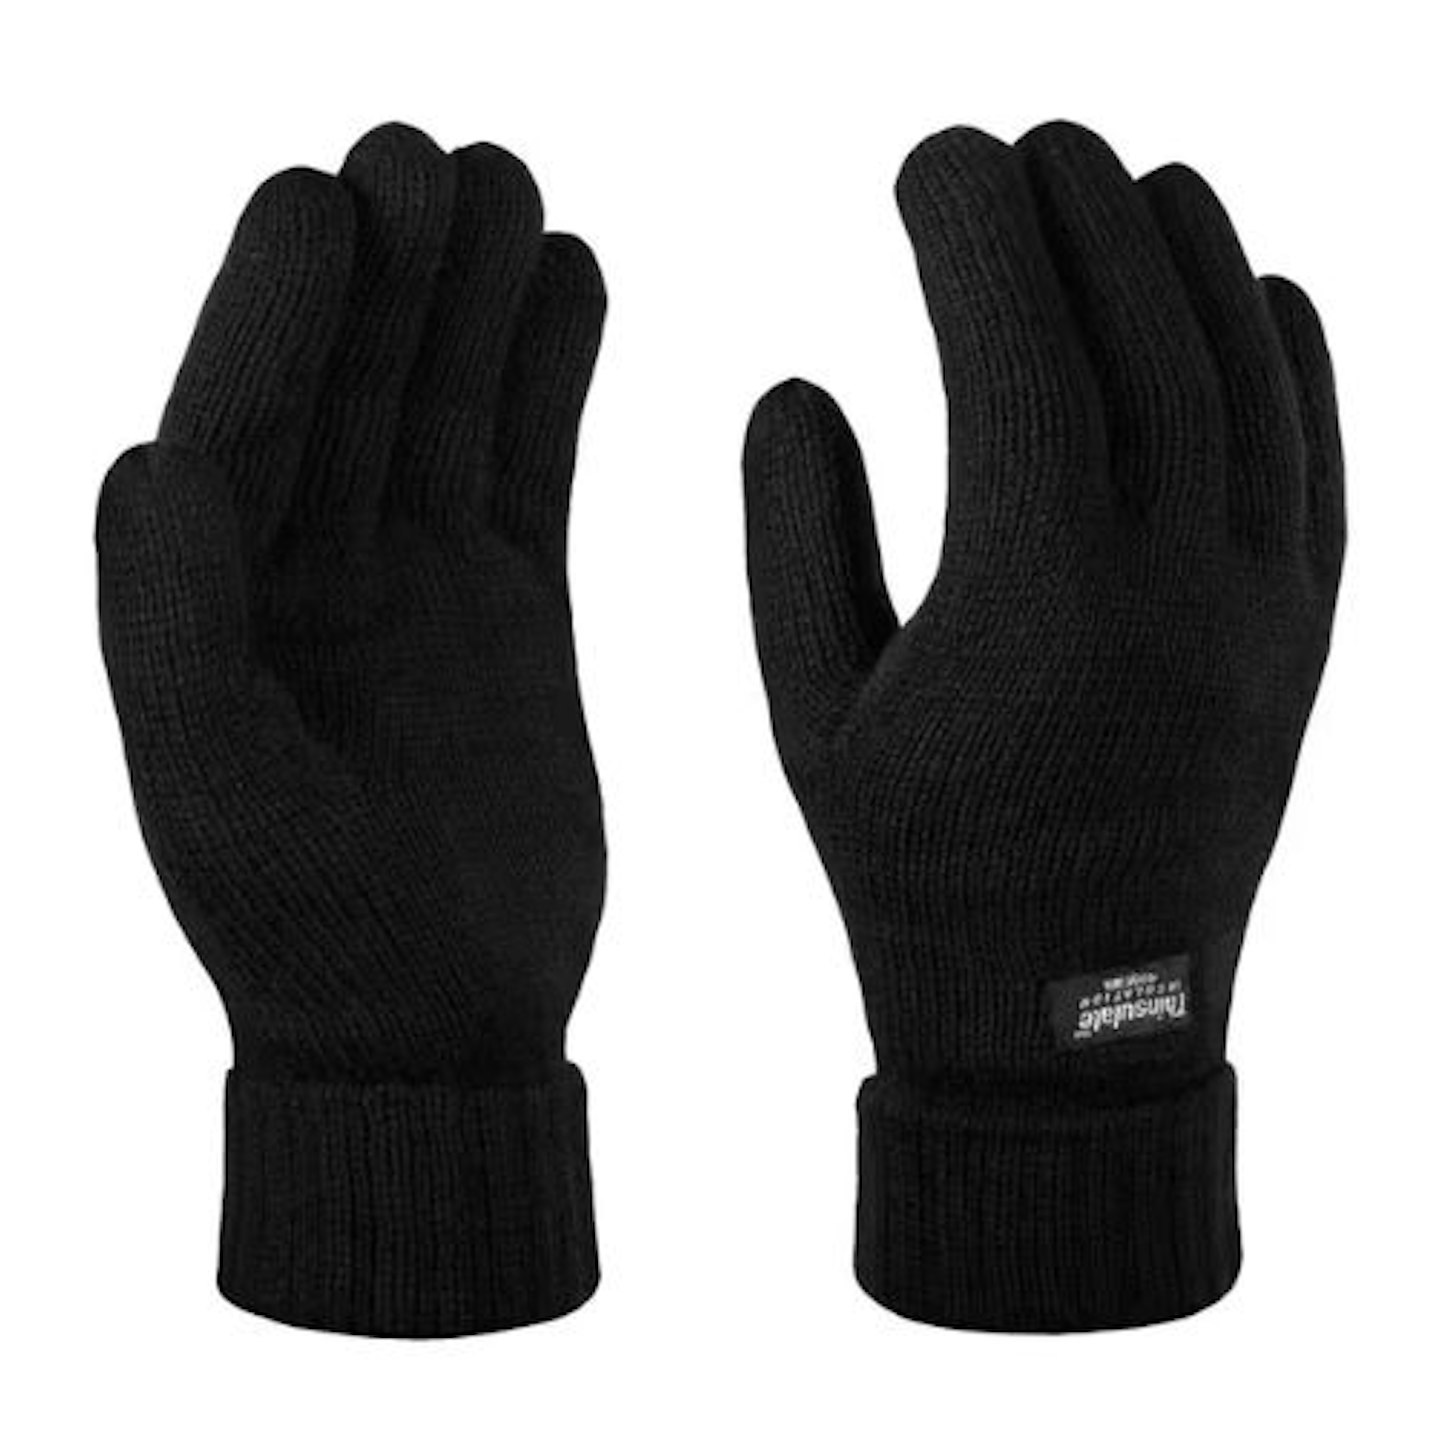 Unisex Thinsulate Thermal Winter Gloves (Black)